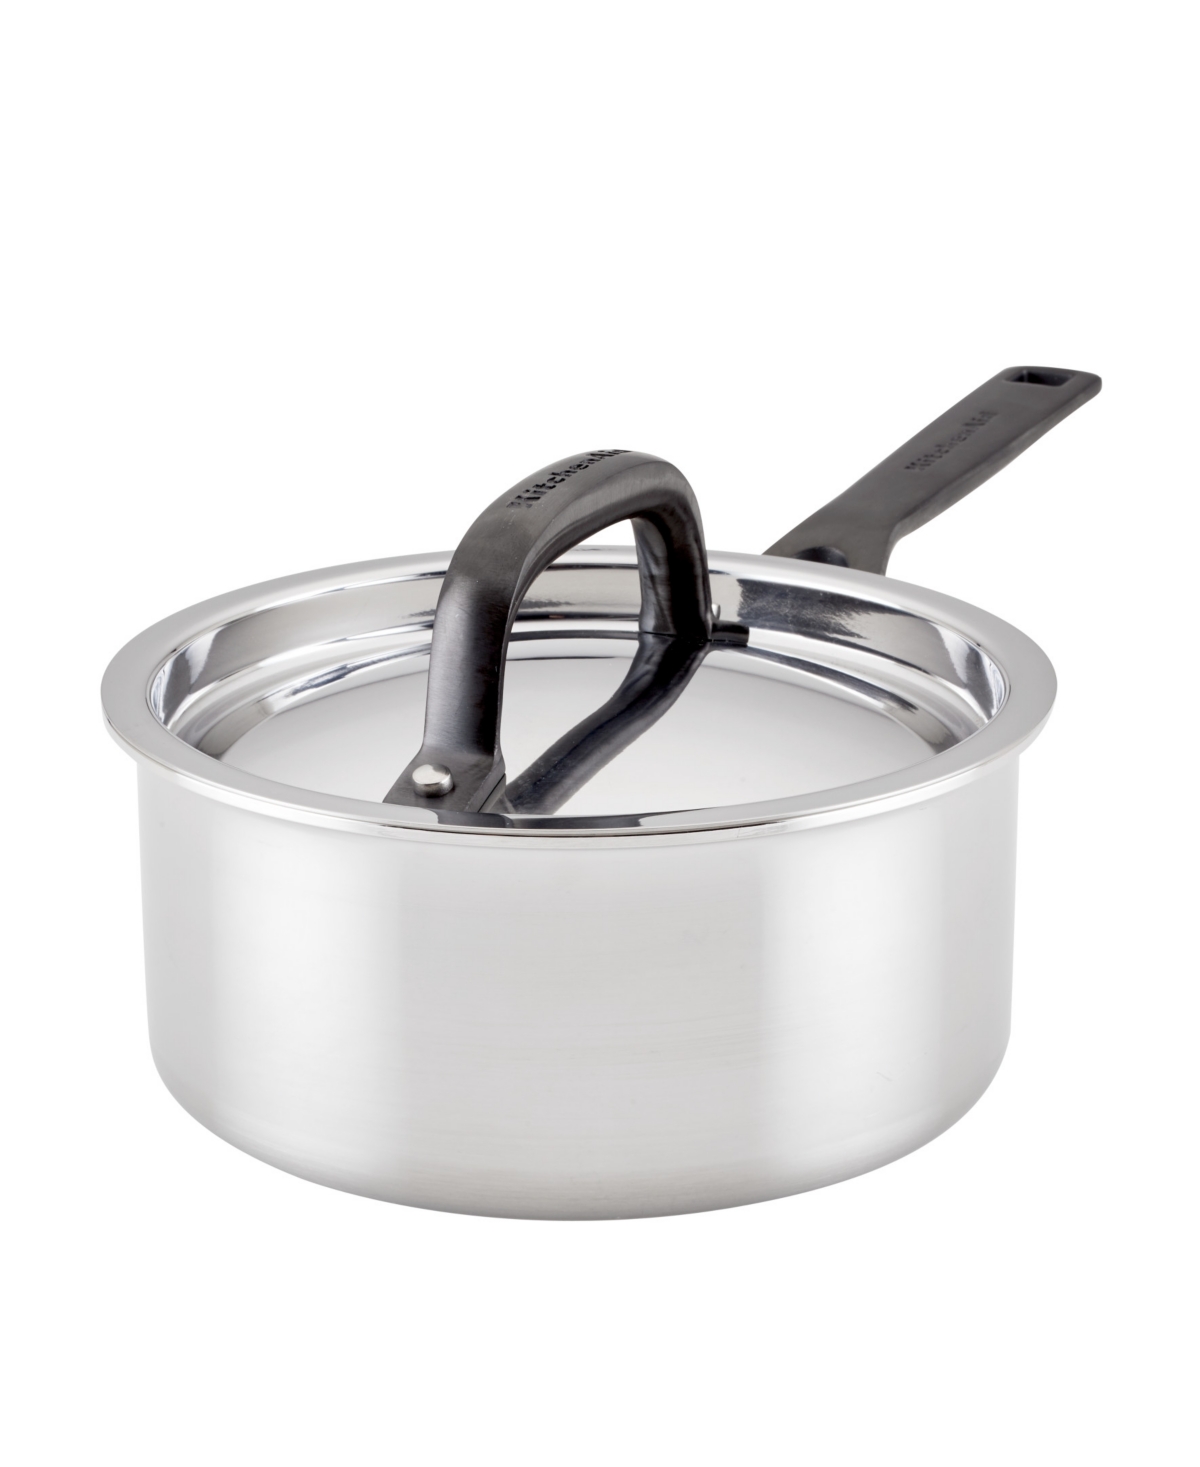 Kitchenaid 5-ply Clad Stainless Steel 1.5 Quart Induction Sauce Pan With Lid In Polished Stainless Steel